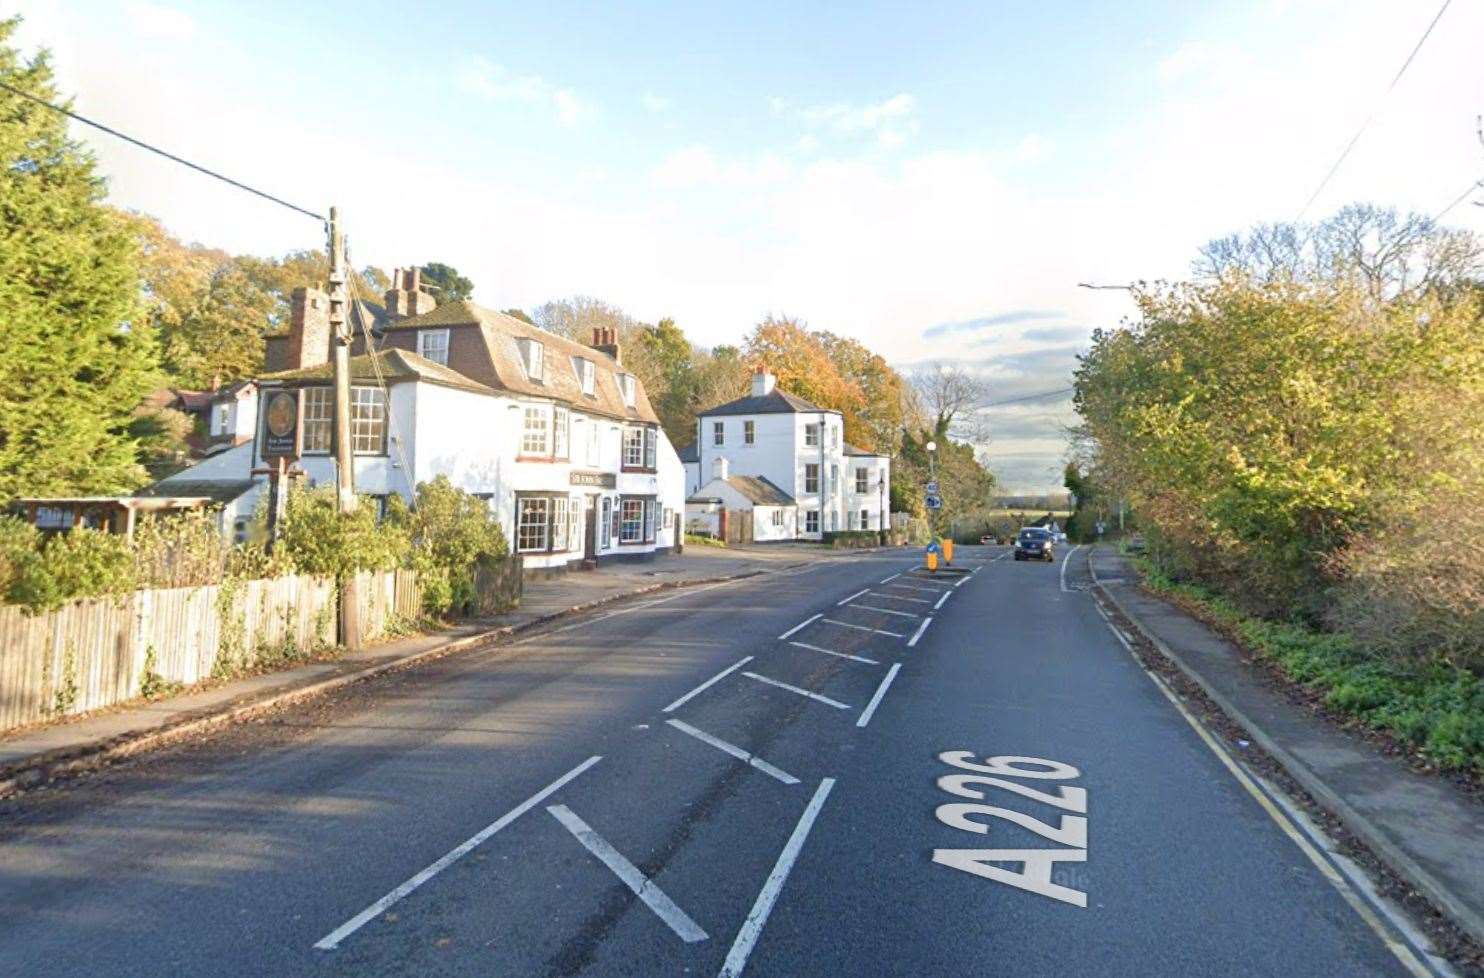 There has been an accident involving two vehicles along the A226 Gravesend Road in Higham. Picture: Google